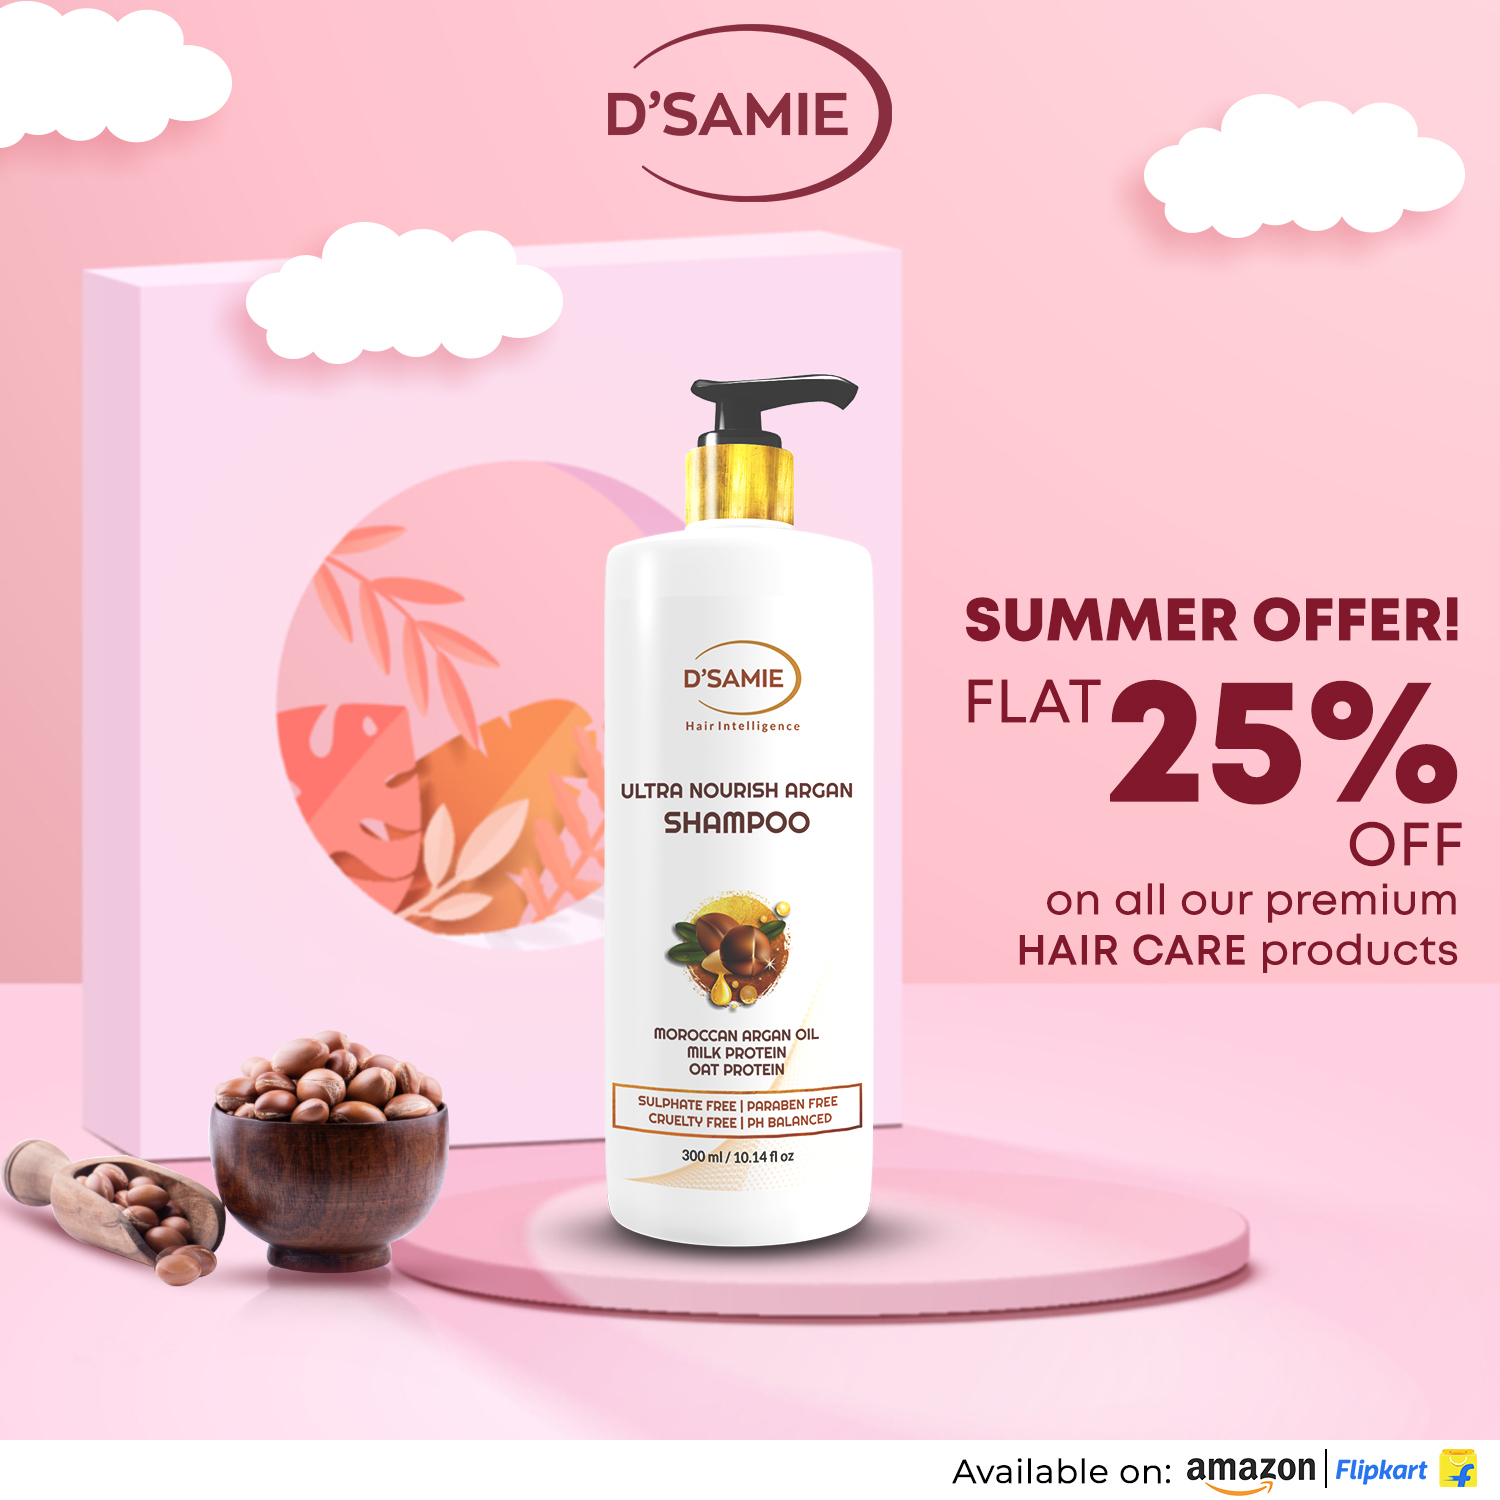 dsamie-offer-campaign